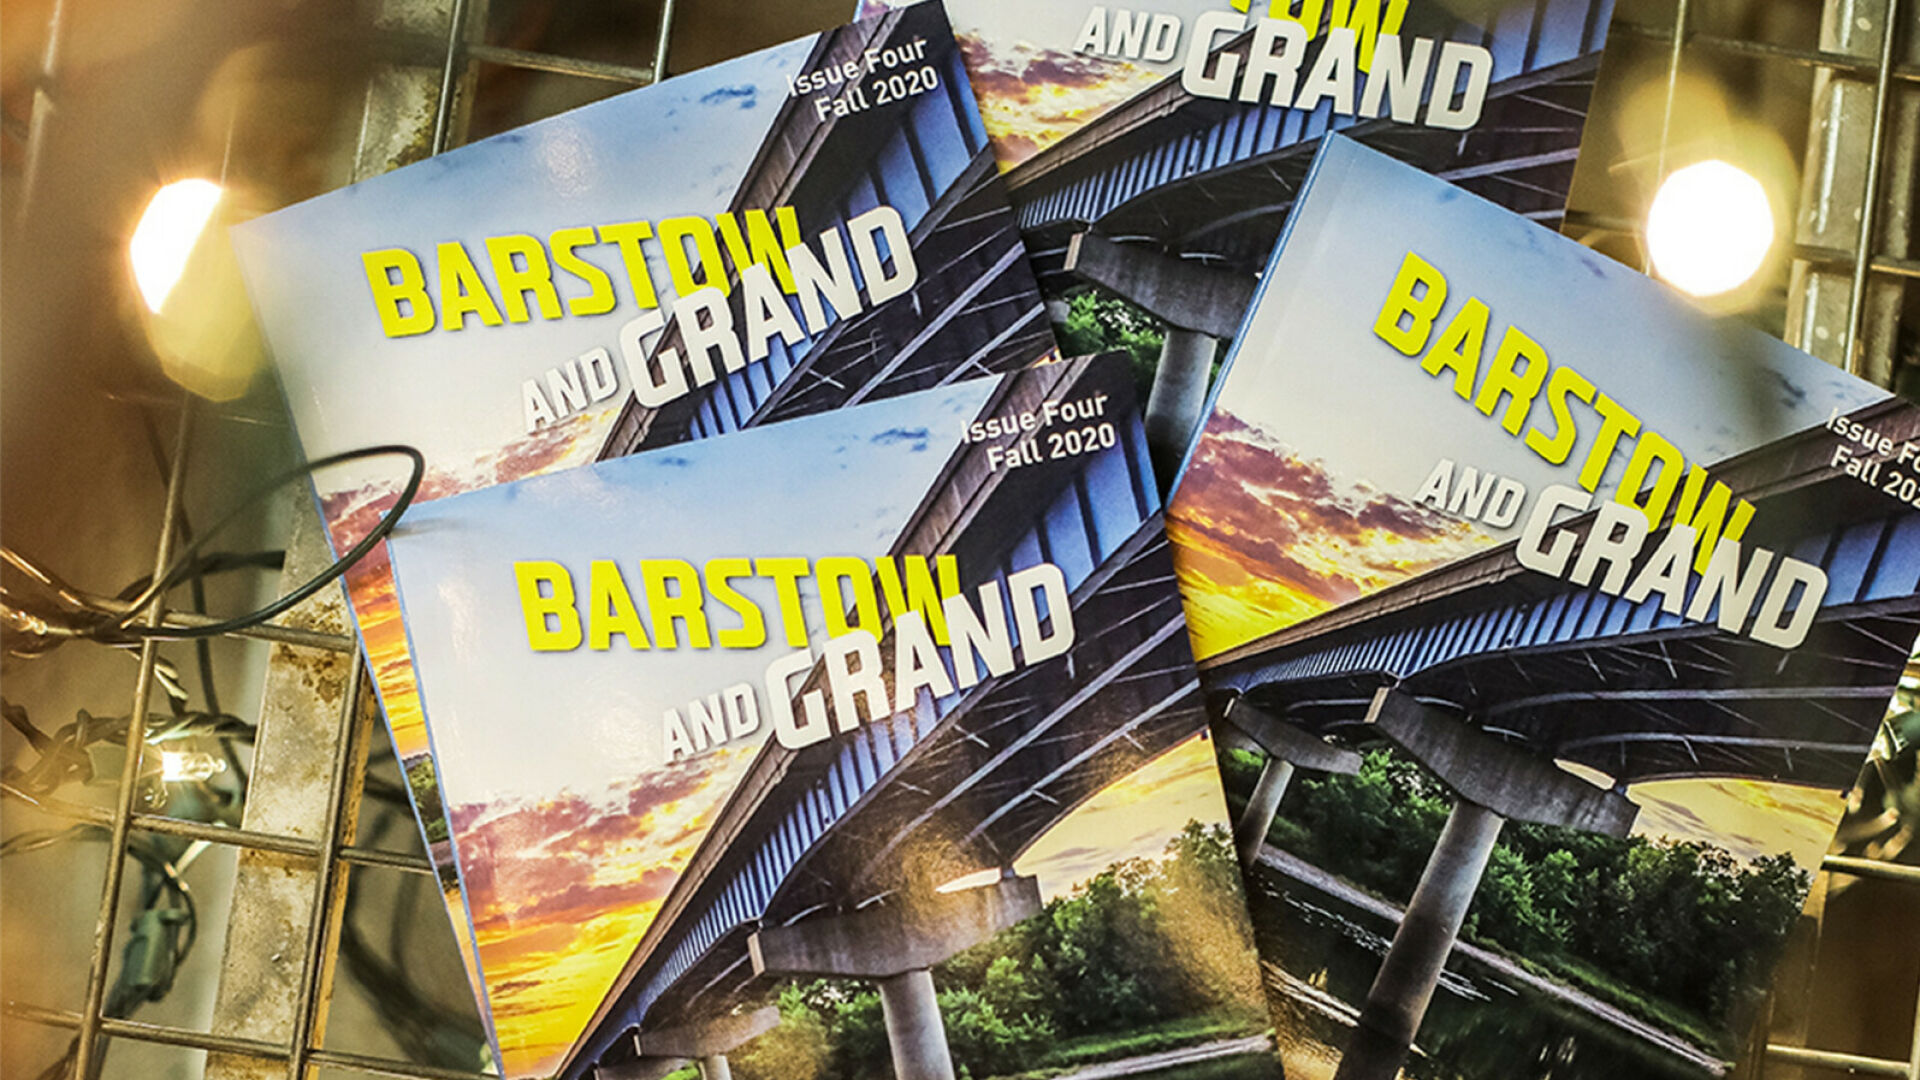 THEY WANT YOU, WRITERS! ‘Barstow & Grand’ Now Accepting...